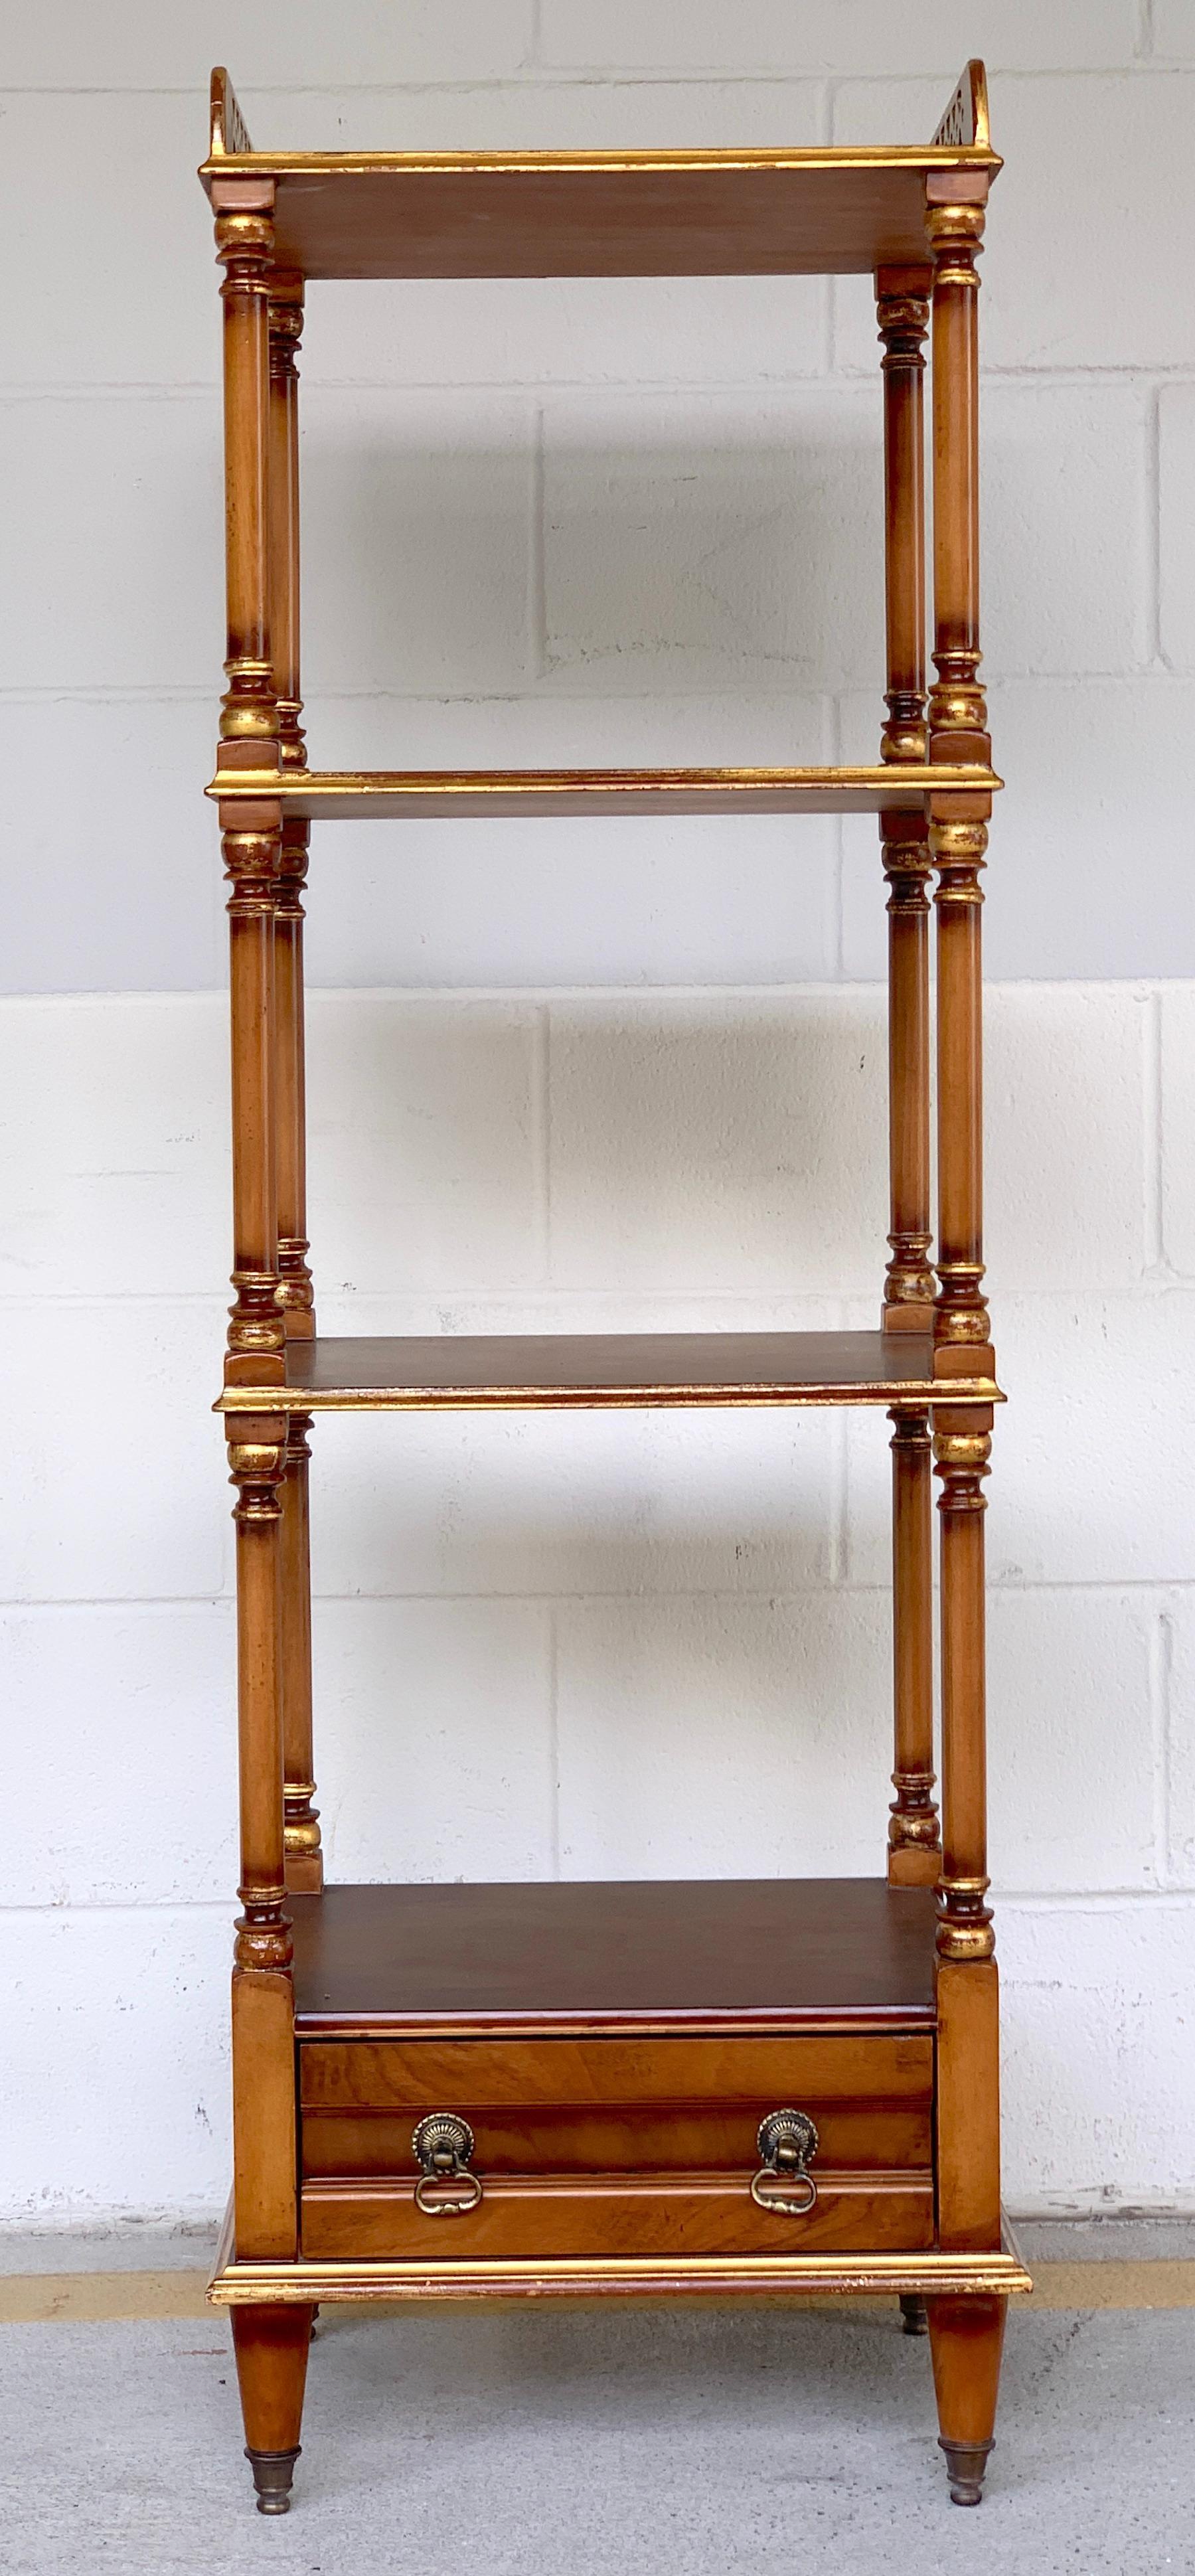 English Regency style mahogany and burl three tier étagère, with pierced 2-Inch high giltwood gallery, and one bottom drawer, with gilt highlights, raised on brass sabot legs.
Three 13.5” depth x 15” width x 12” height shelves
One 13” x 4”